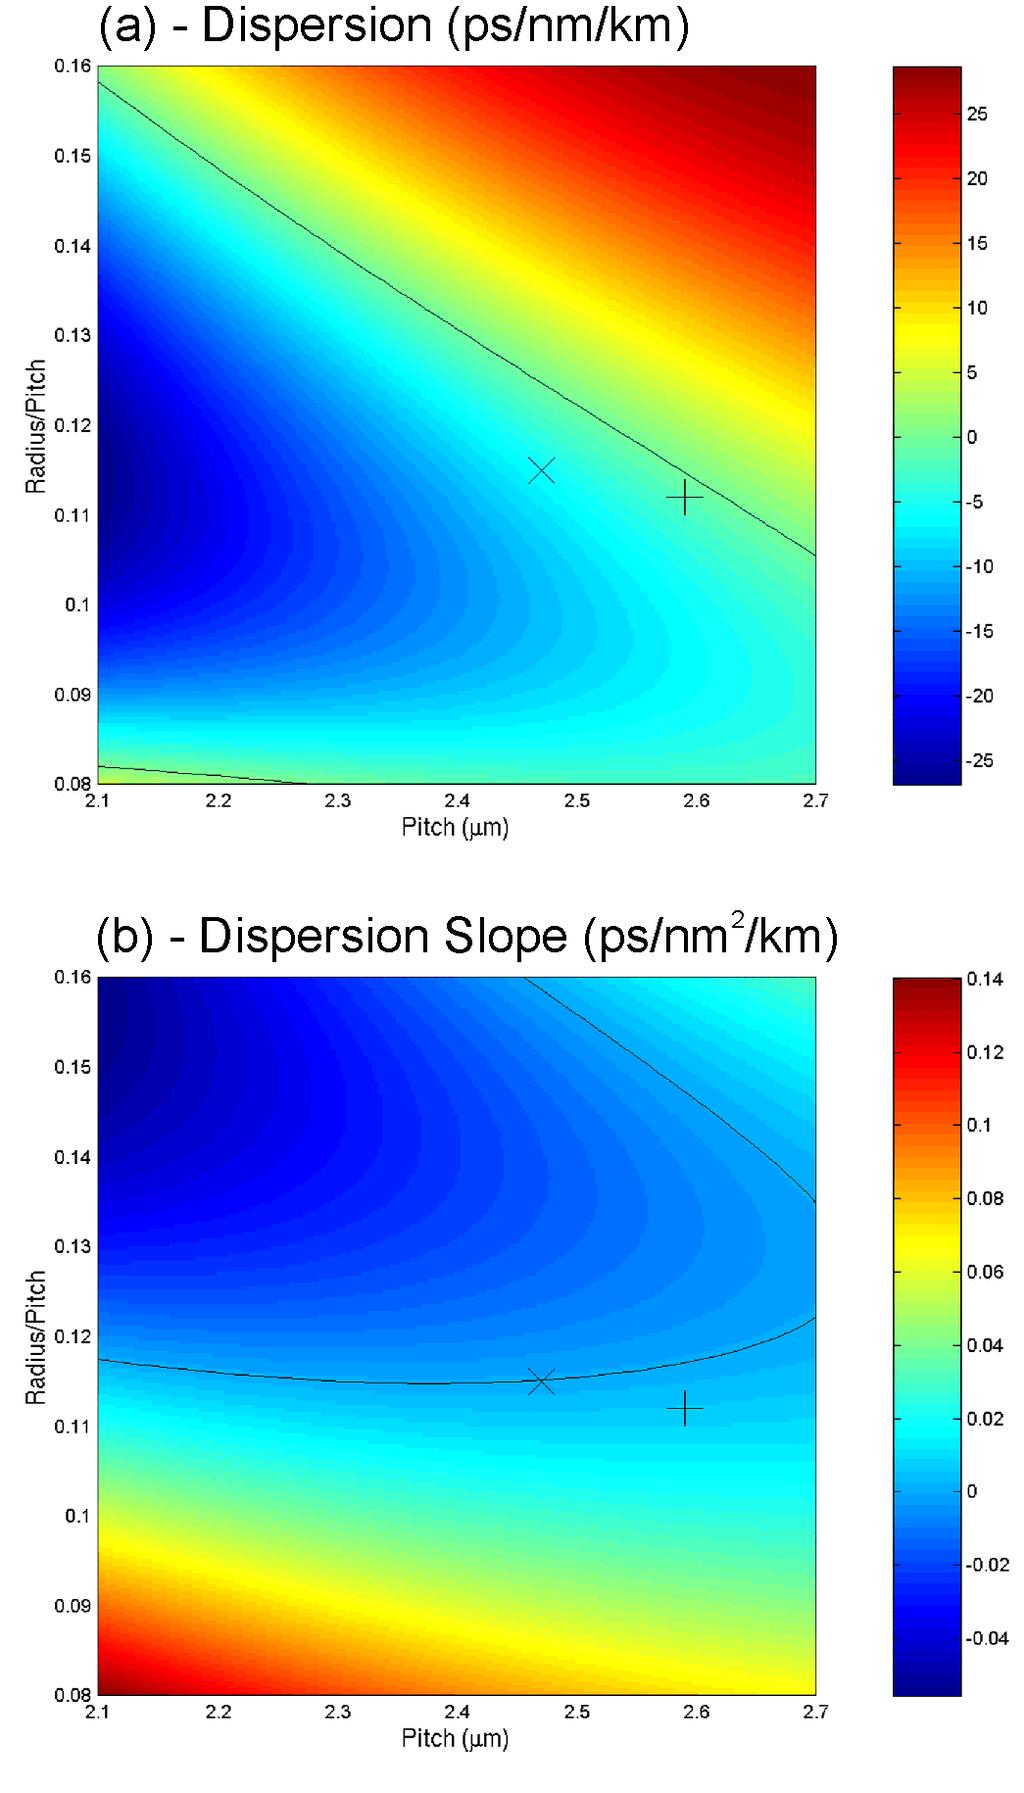 Fig. 5. (a) shows the value of dispersion for variation of hole radius and pitch for a wavelength of 1500 nm. The black line represents zero dispersion.